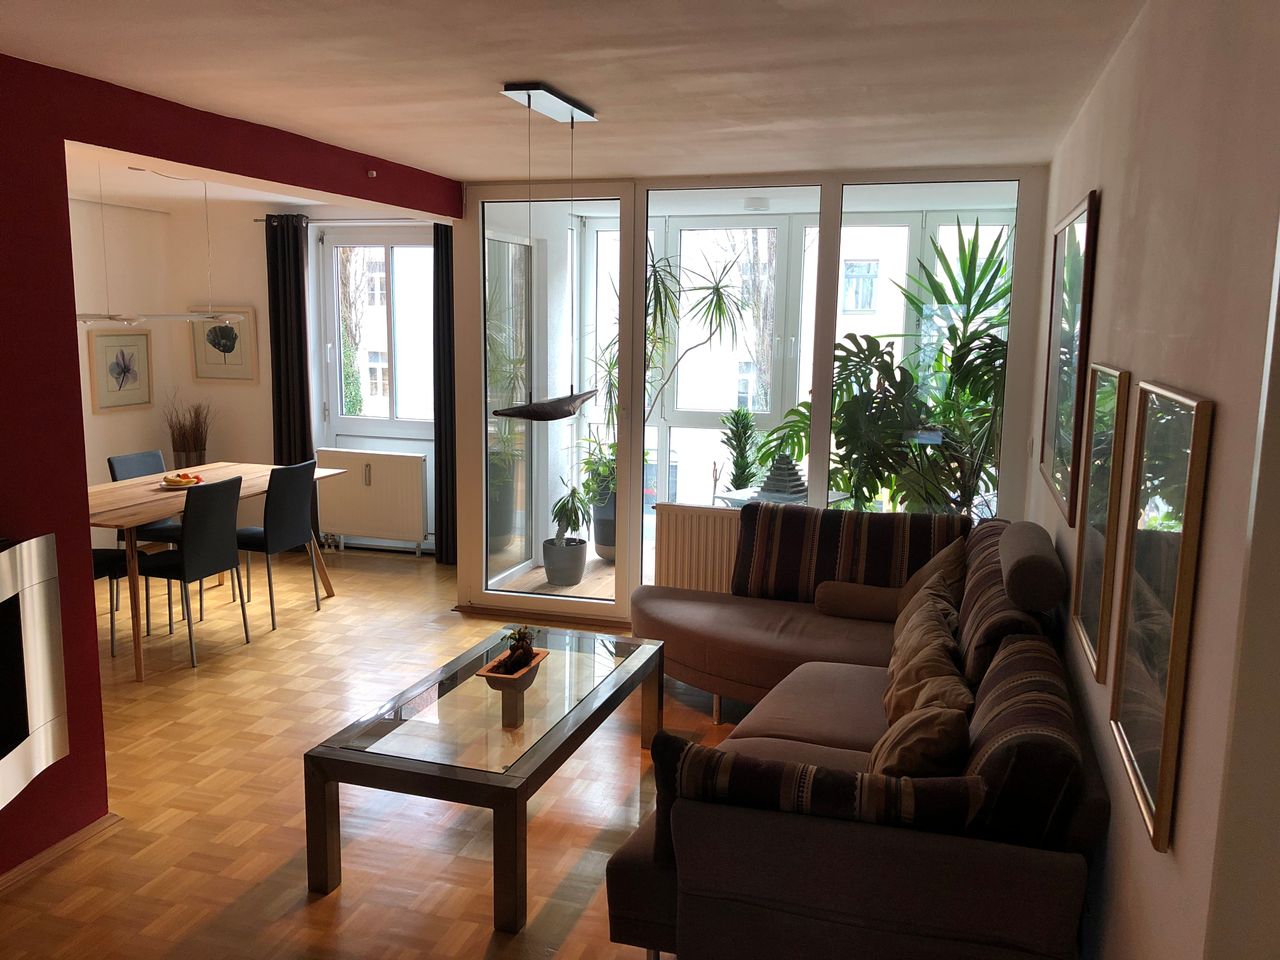 Exclusive Flat in centrally located 'Alt'Sendling/ Munich, 2 sep. entrances, fully equipped